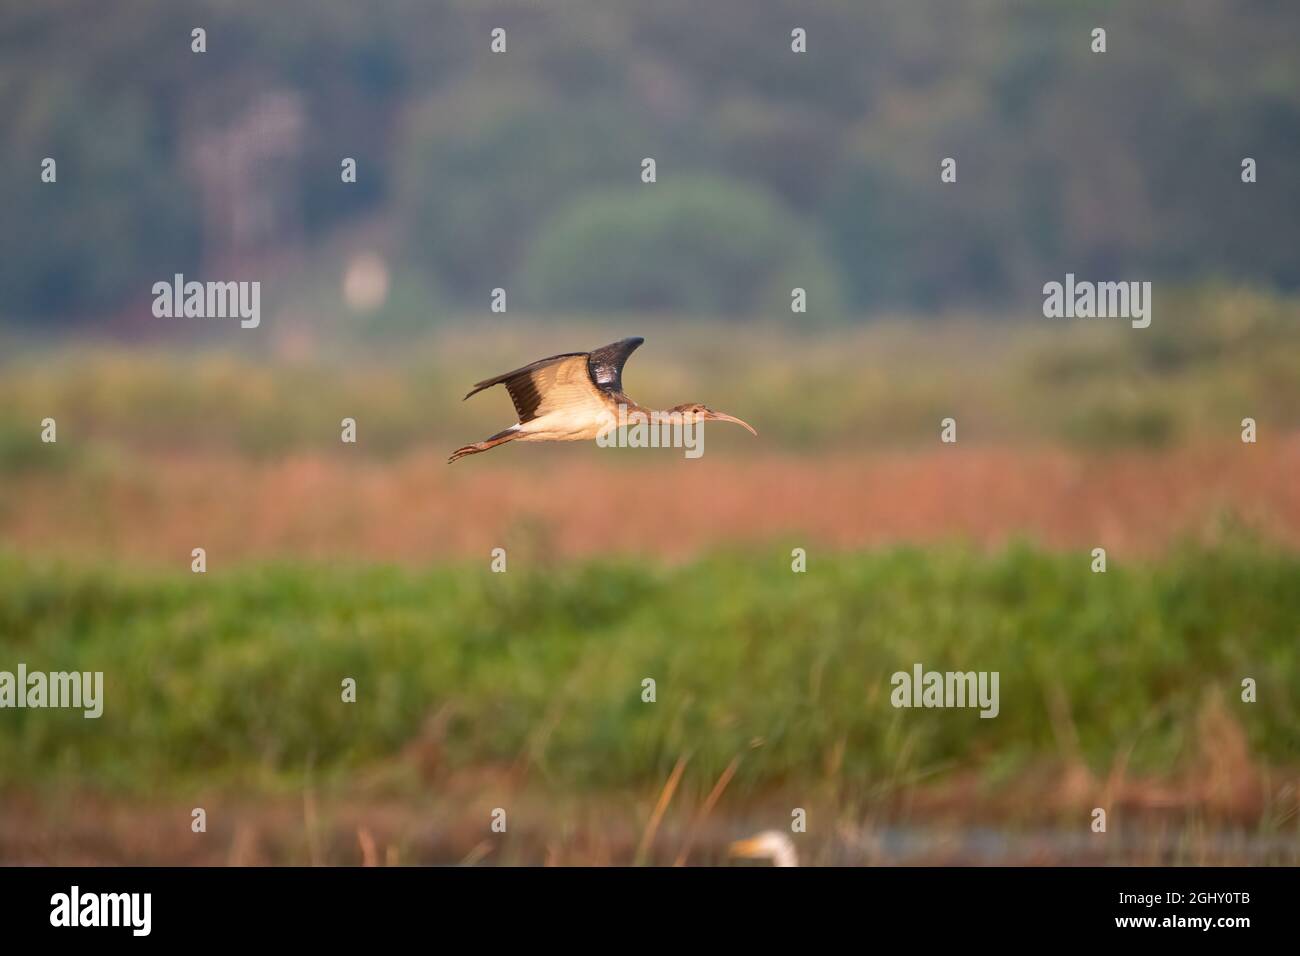 A White-faced Ibis flying alone over the grassy marsh of a lake in a remote wildlife refuge on a sunny morning. Stock Photo